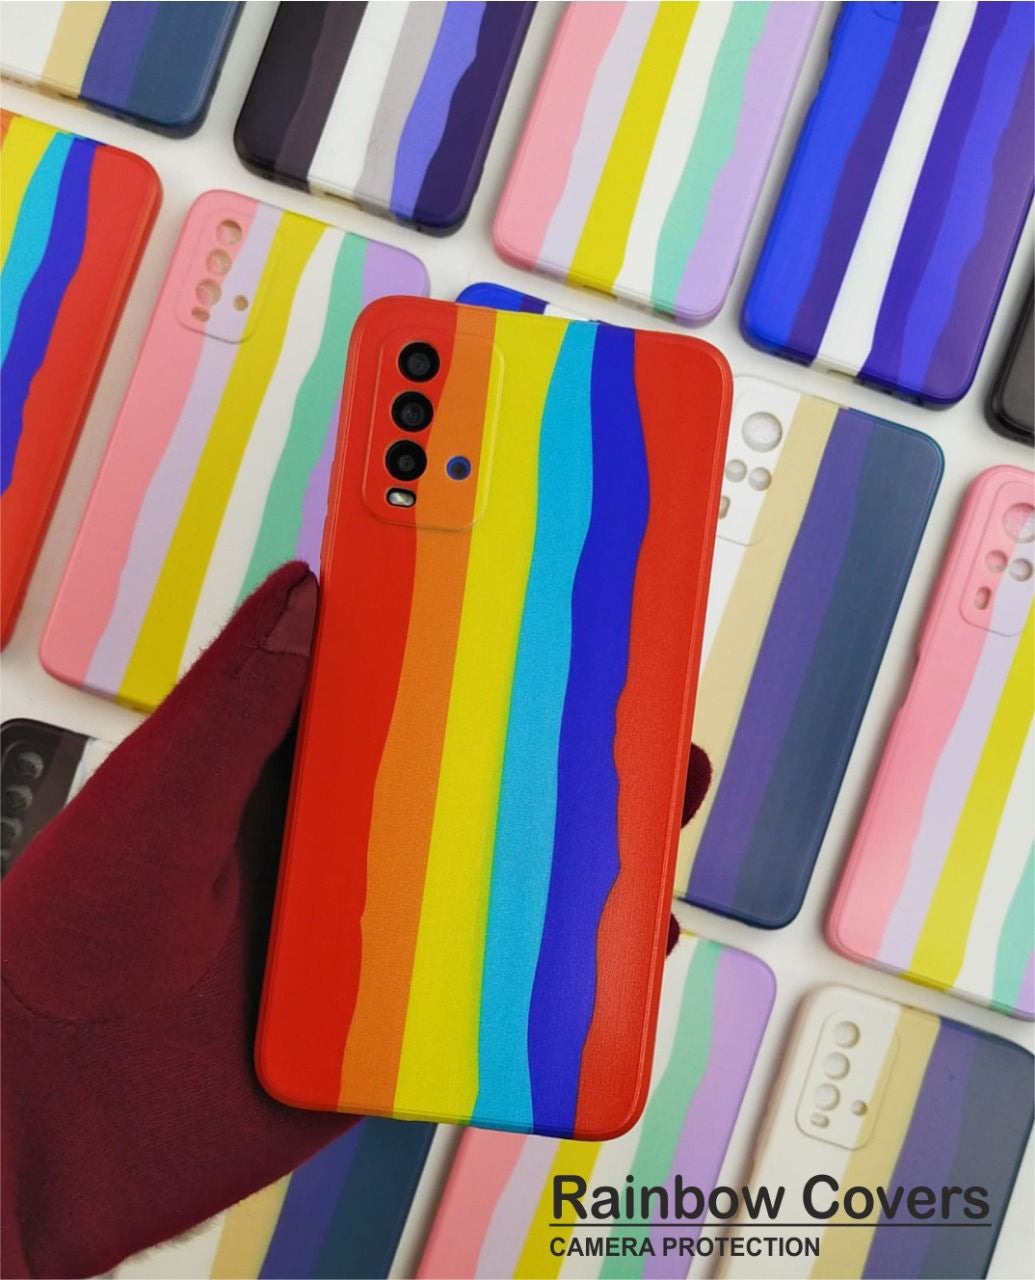 21261 REALME'S Rainbow Soft Printed Case With Soft Material | Softness with Phone Protection Cover | For Girls Boys Women Kids Soft Case Cover | Soft Case Shockproof Case | With Soft Edges & Full Camera Protection